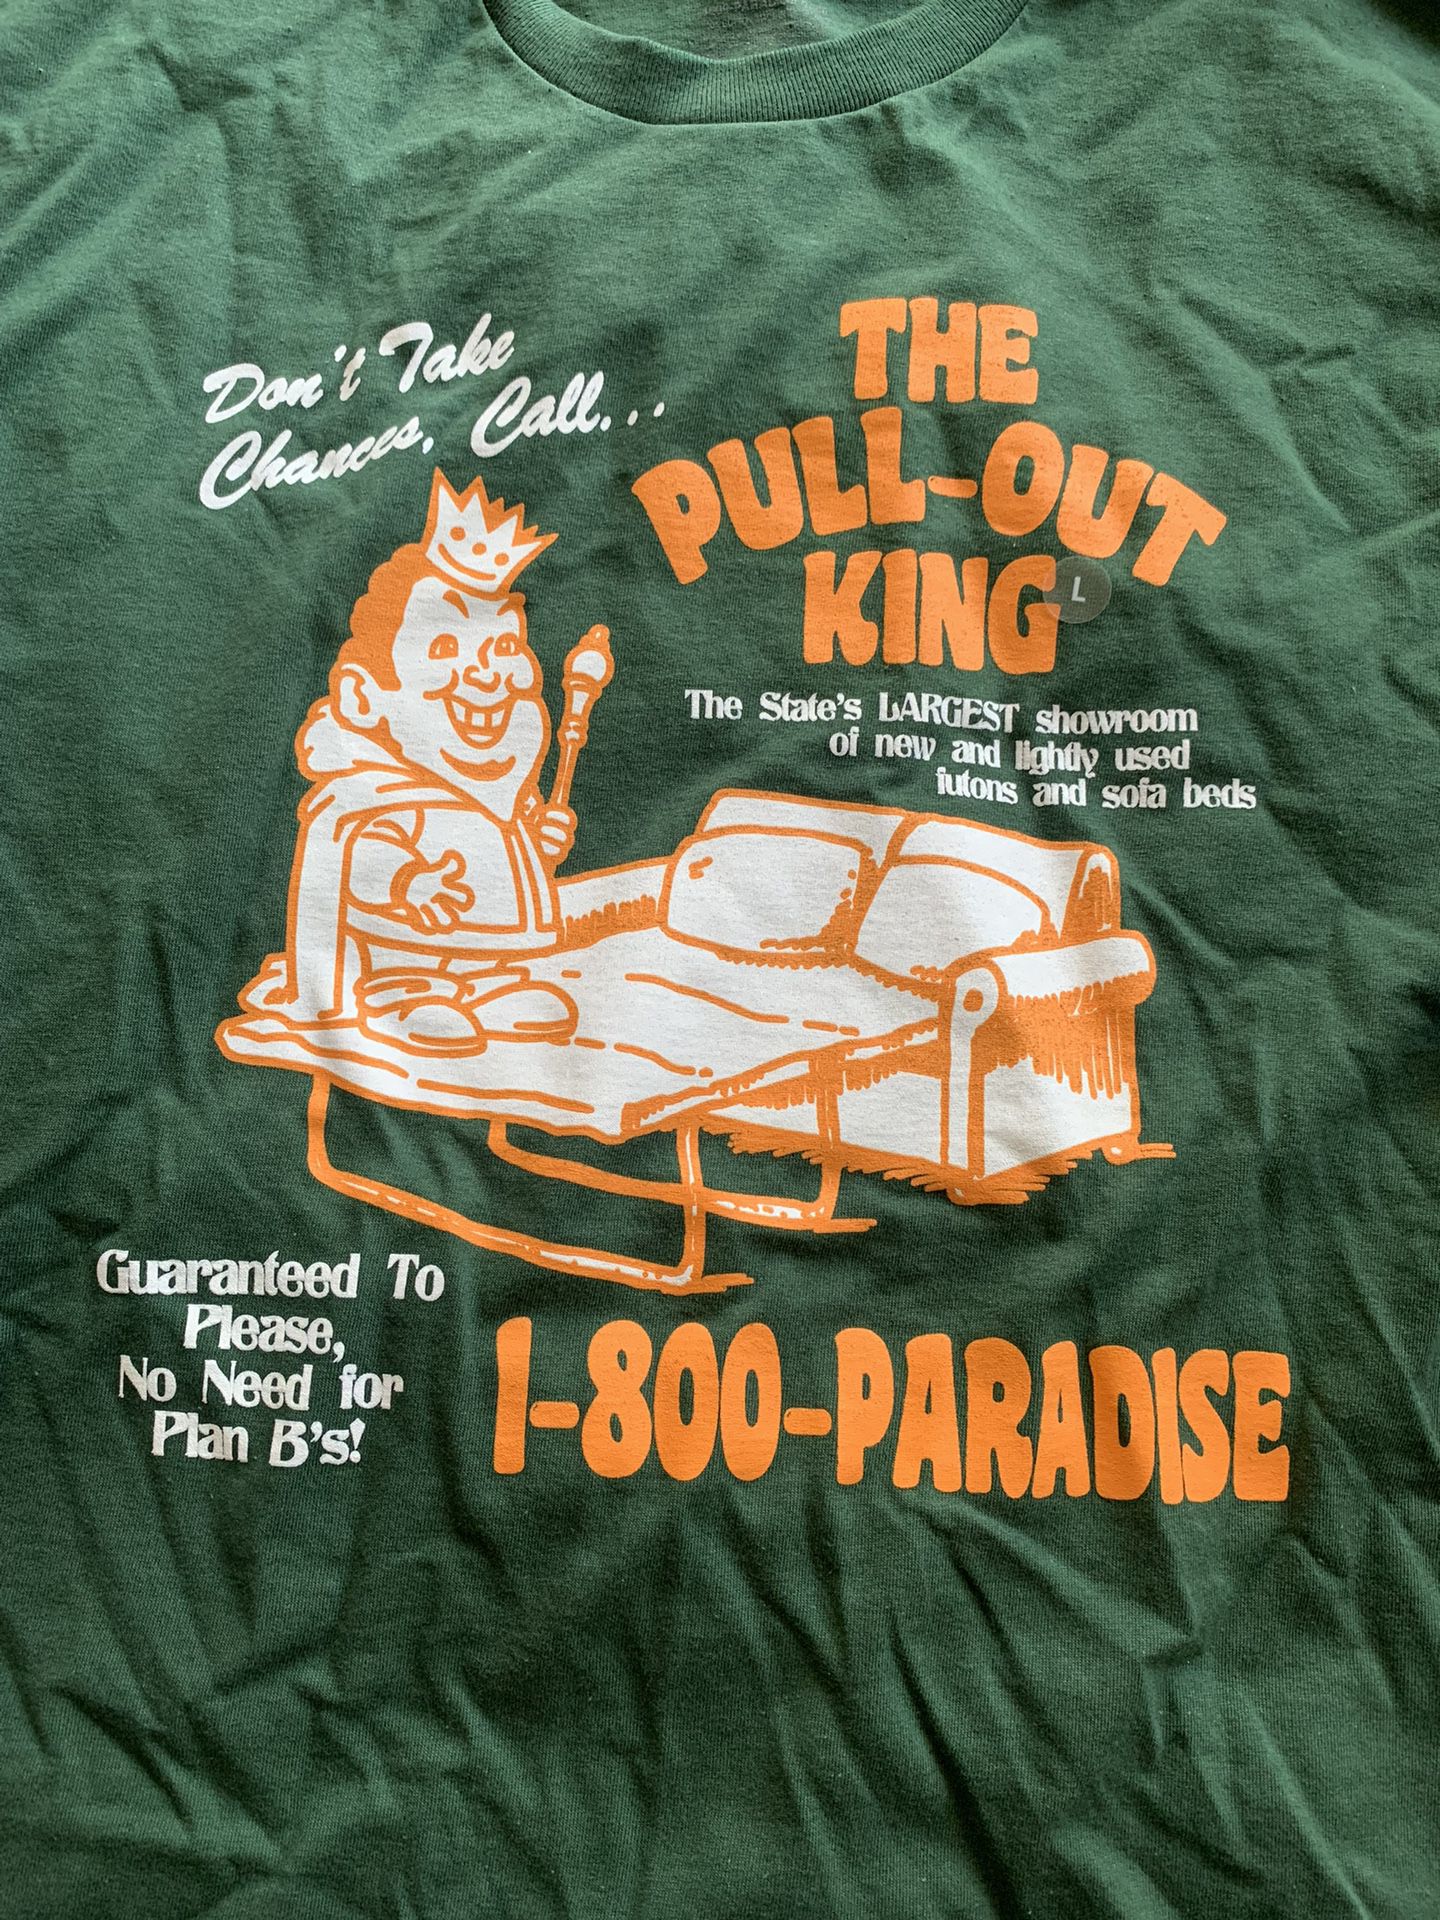 The Pull Out King Shirt